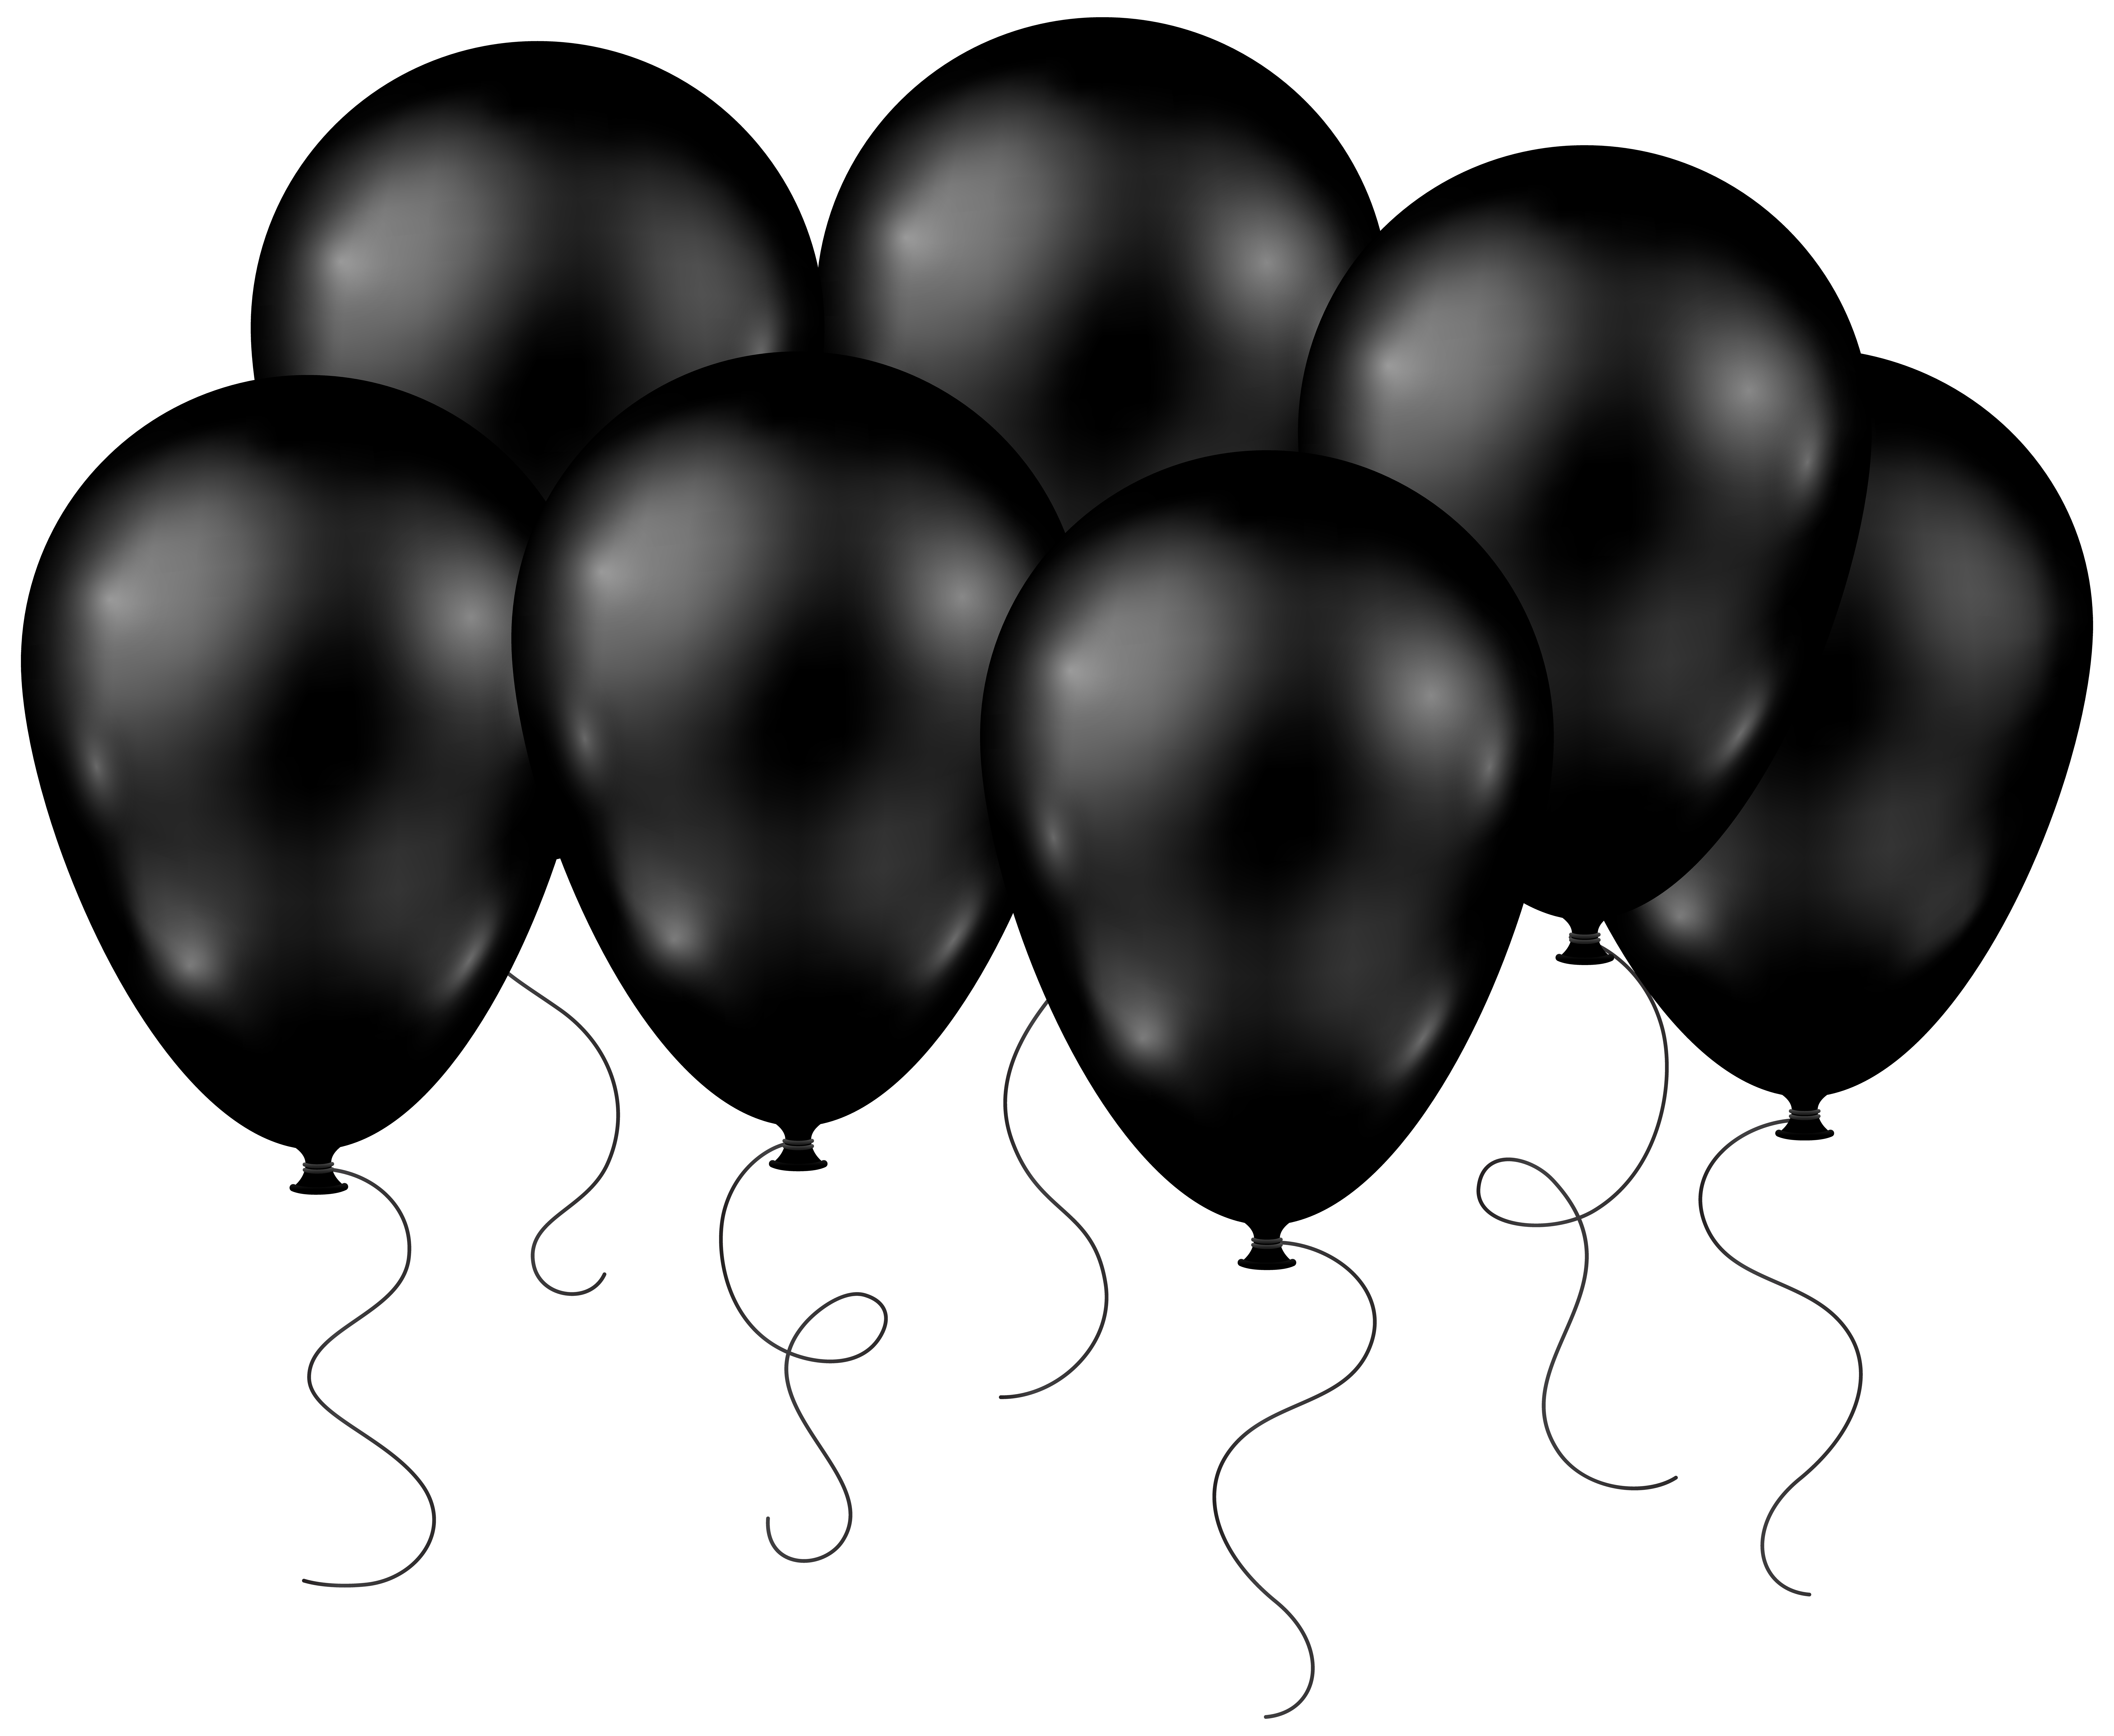 Free Black Balloons Cliparts Download Free Black Balloons Cliparts Png